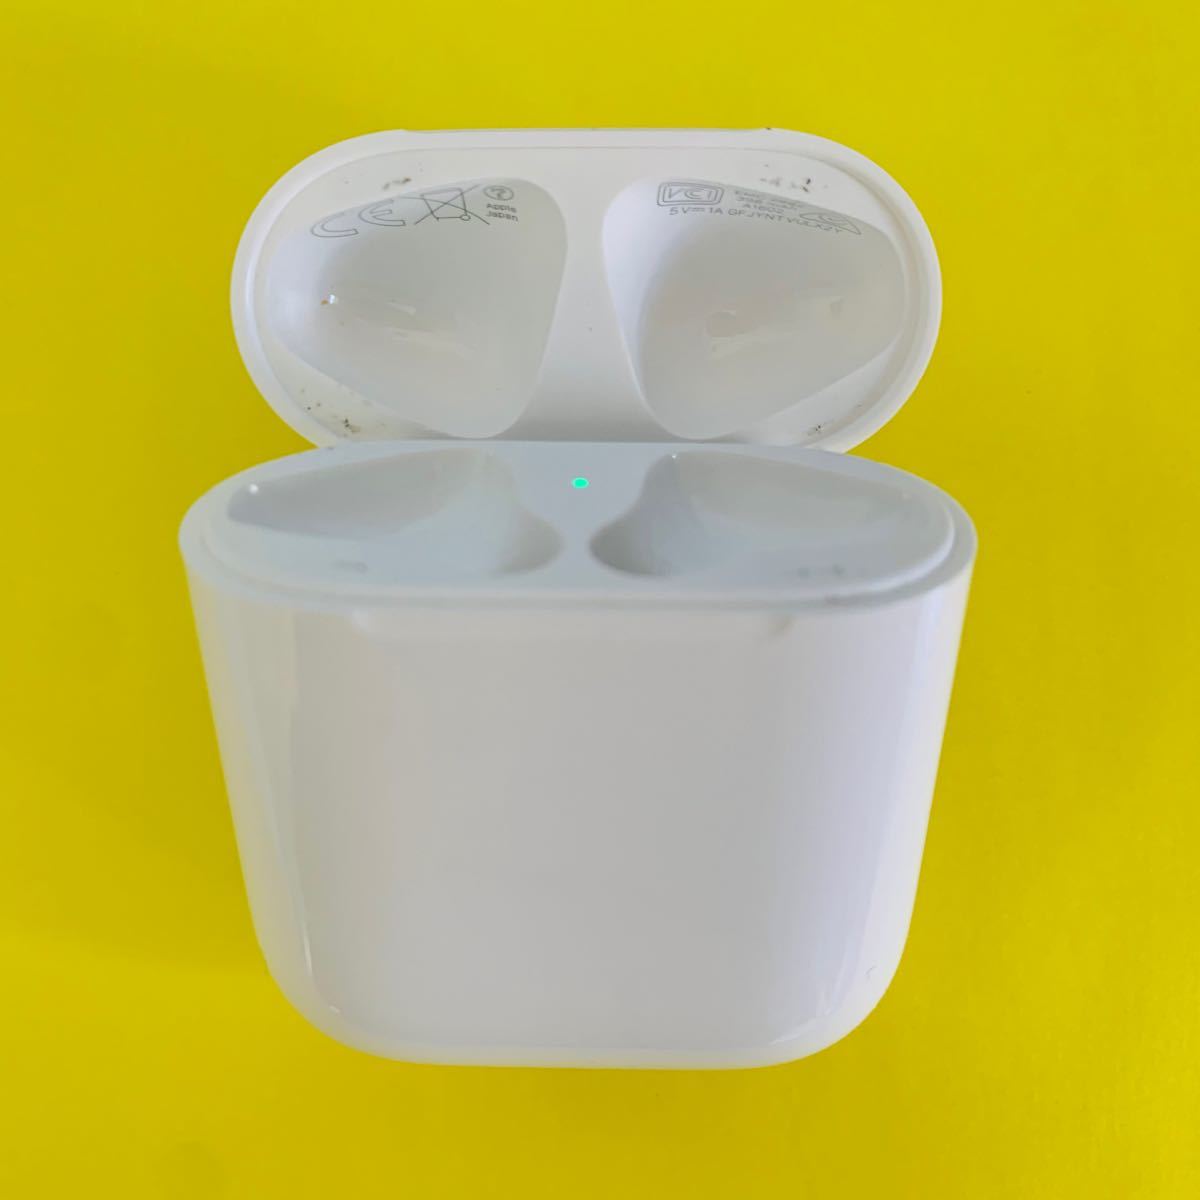 Apple AirPods 第二世代 充電ケース 充電器 正規品｜PayPayフリマ